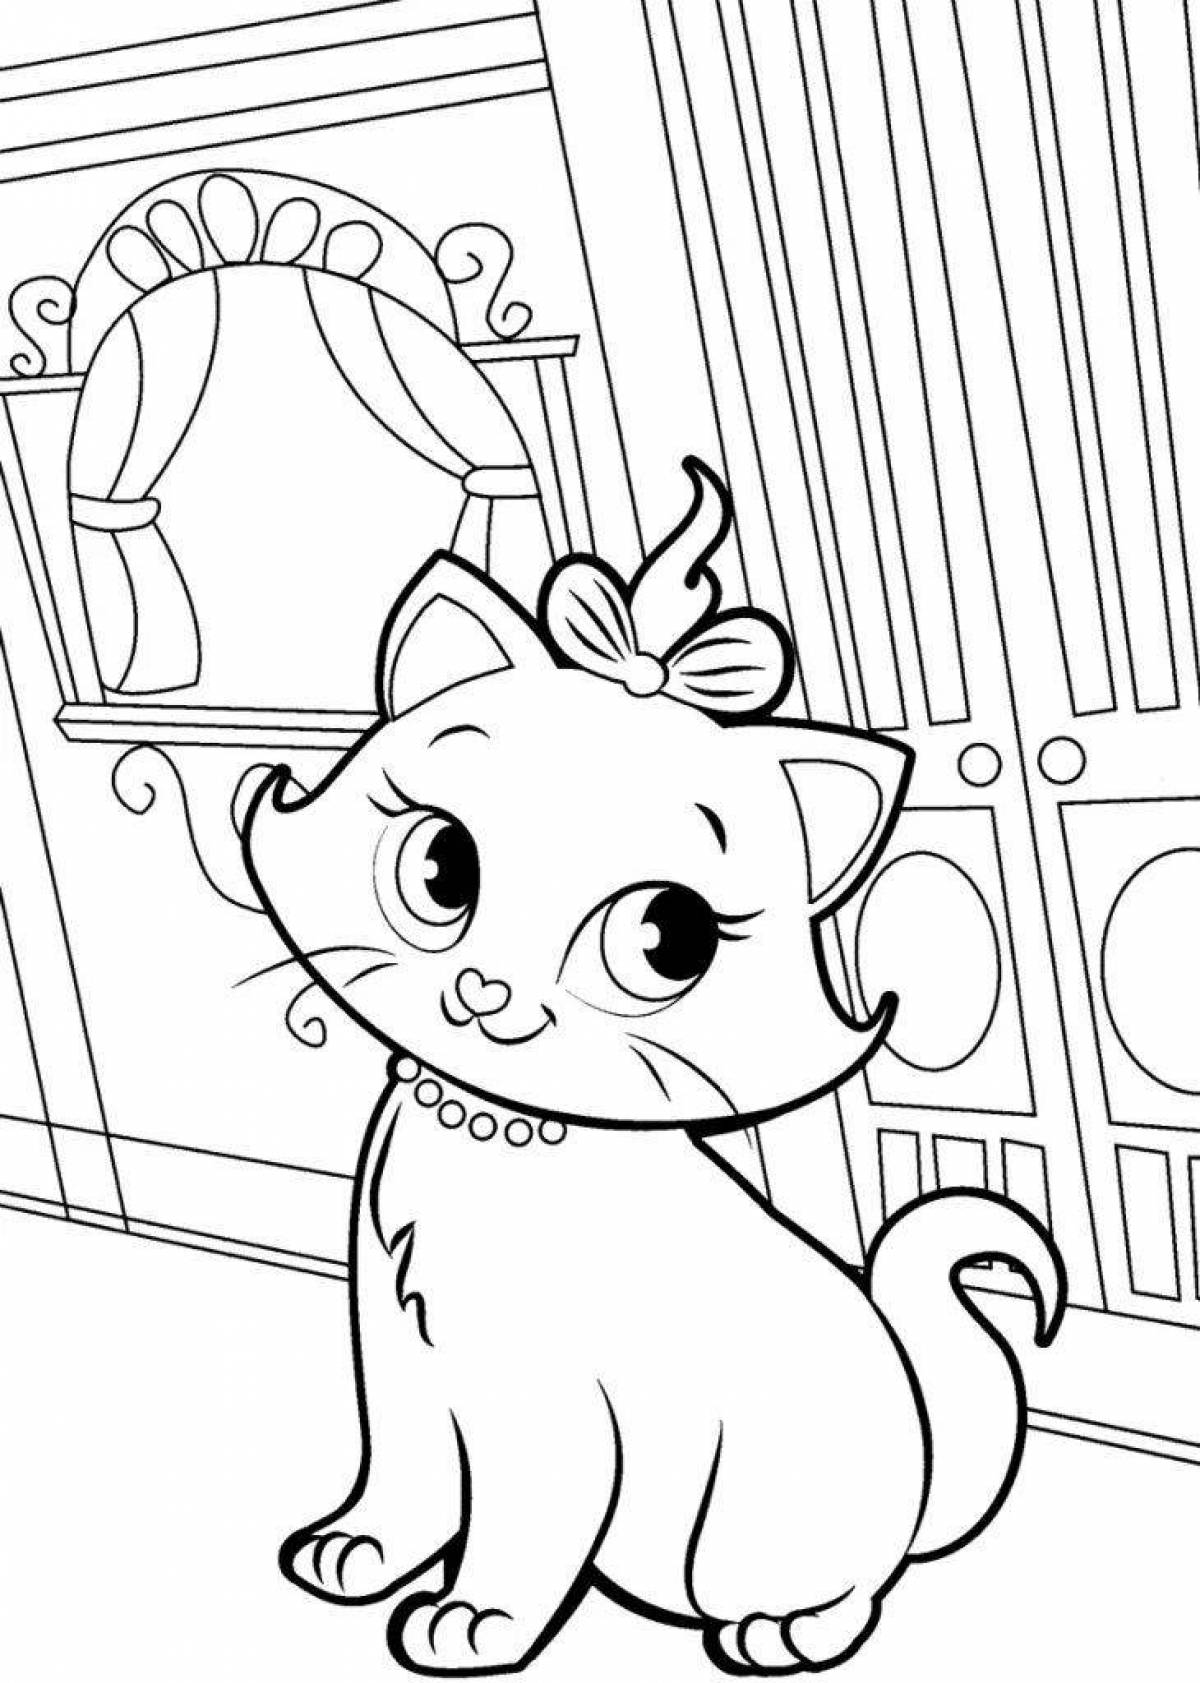 Adorable pussy coloring book